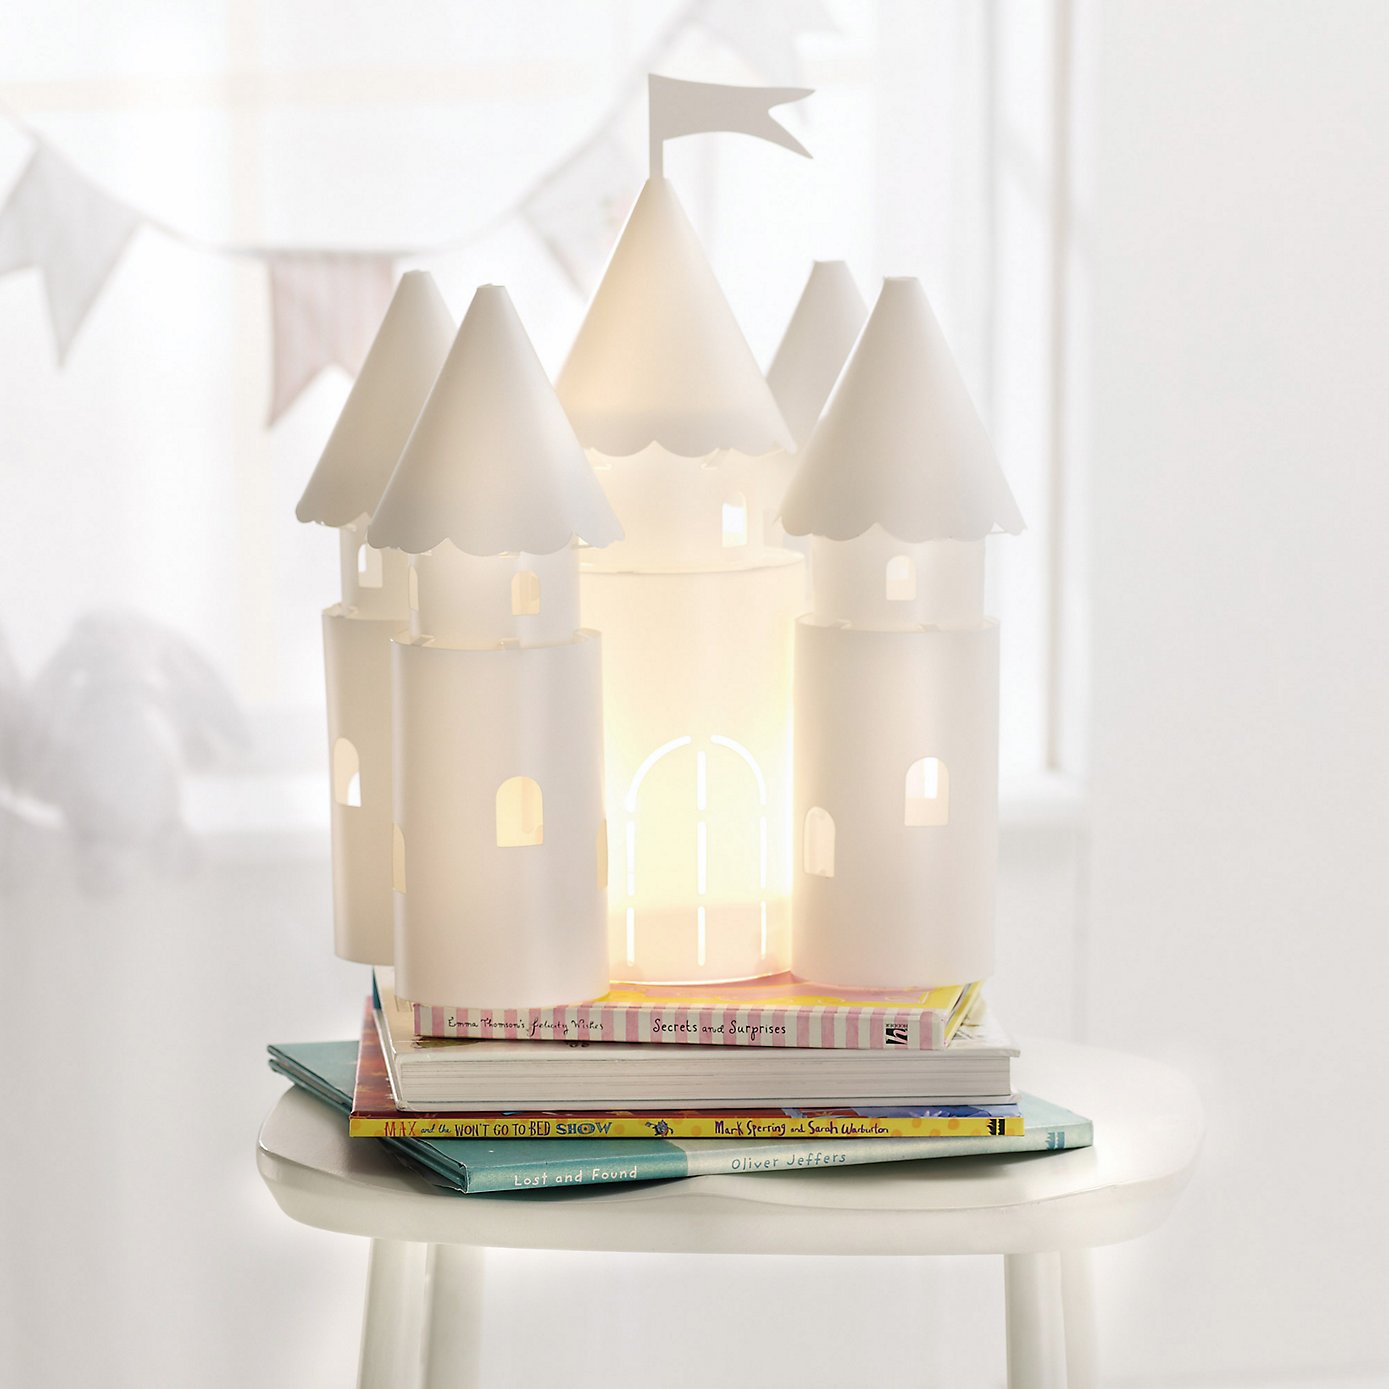 Castle nursery lighting from The White Company